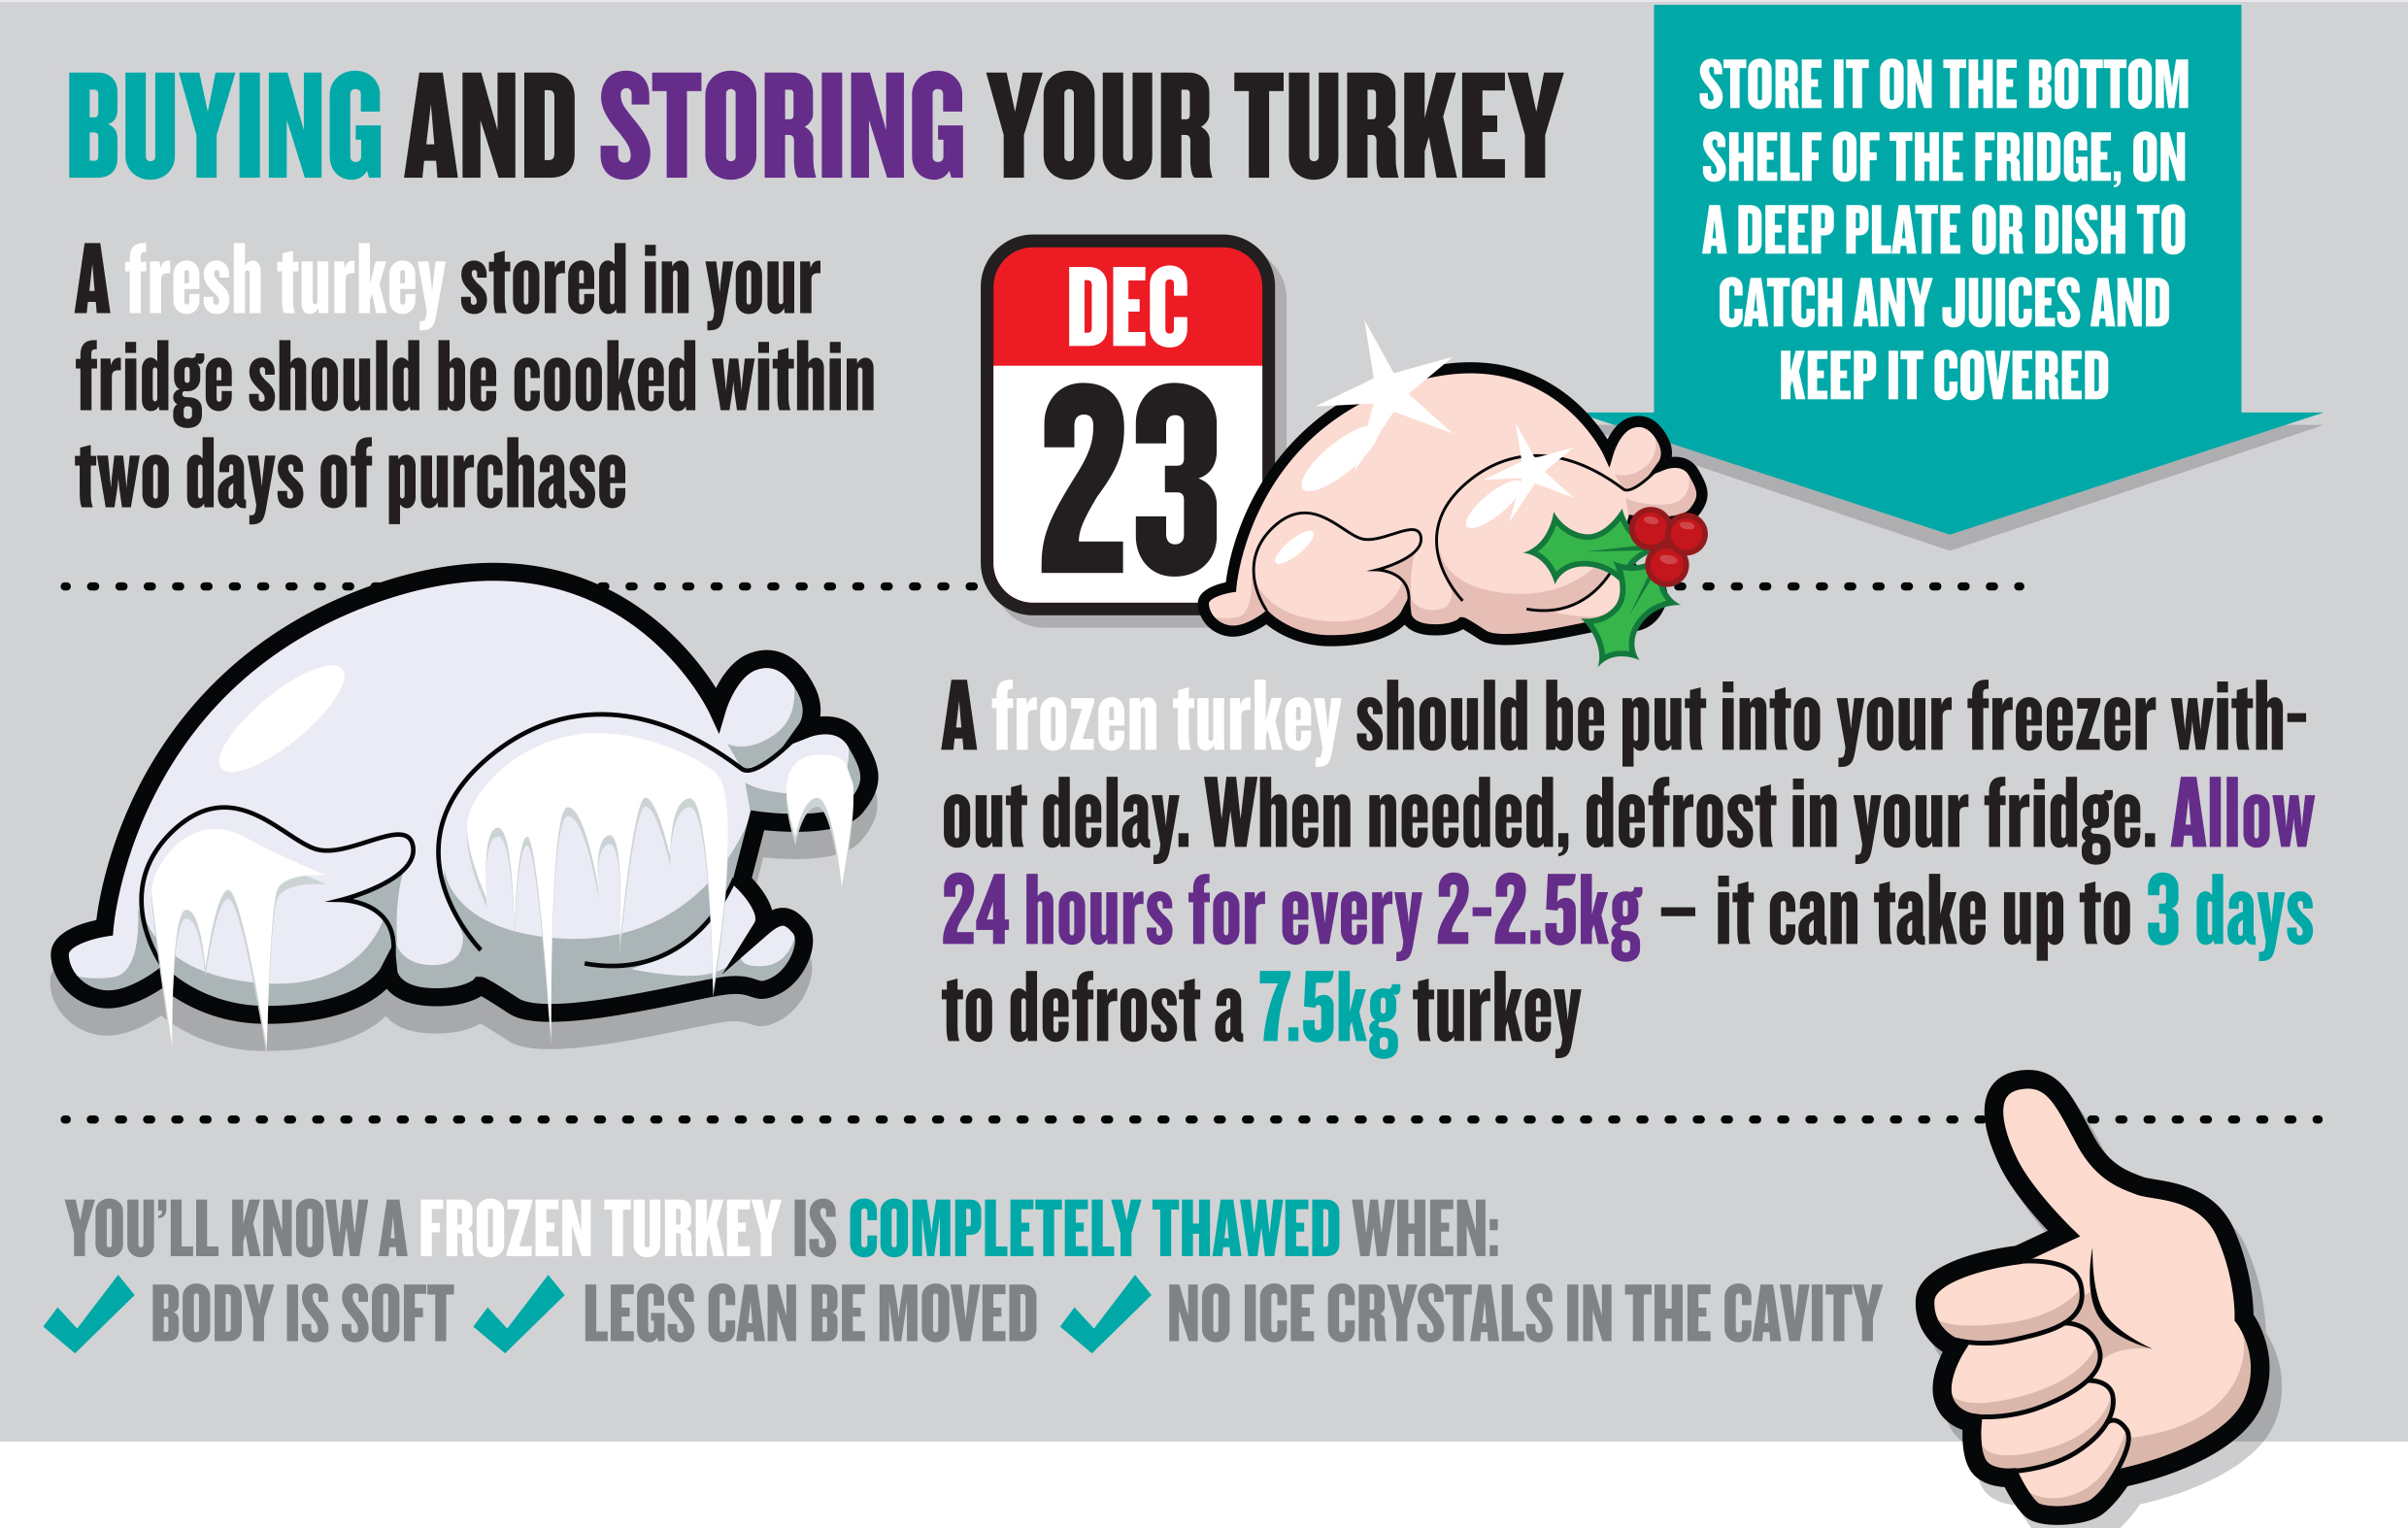 A fresh turkey stored in your fridge should be cooked within two days of purchase.